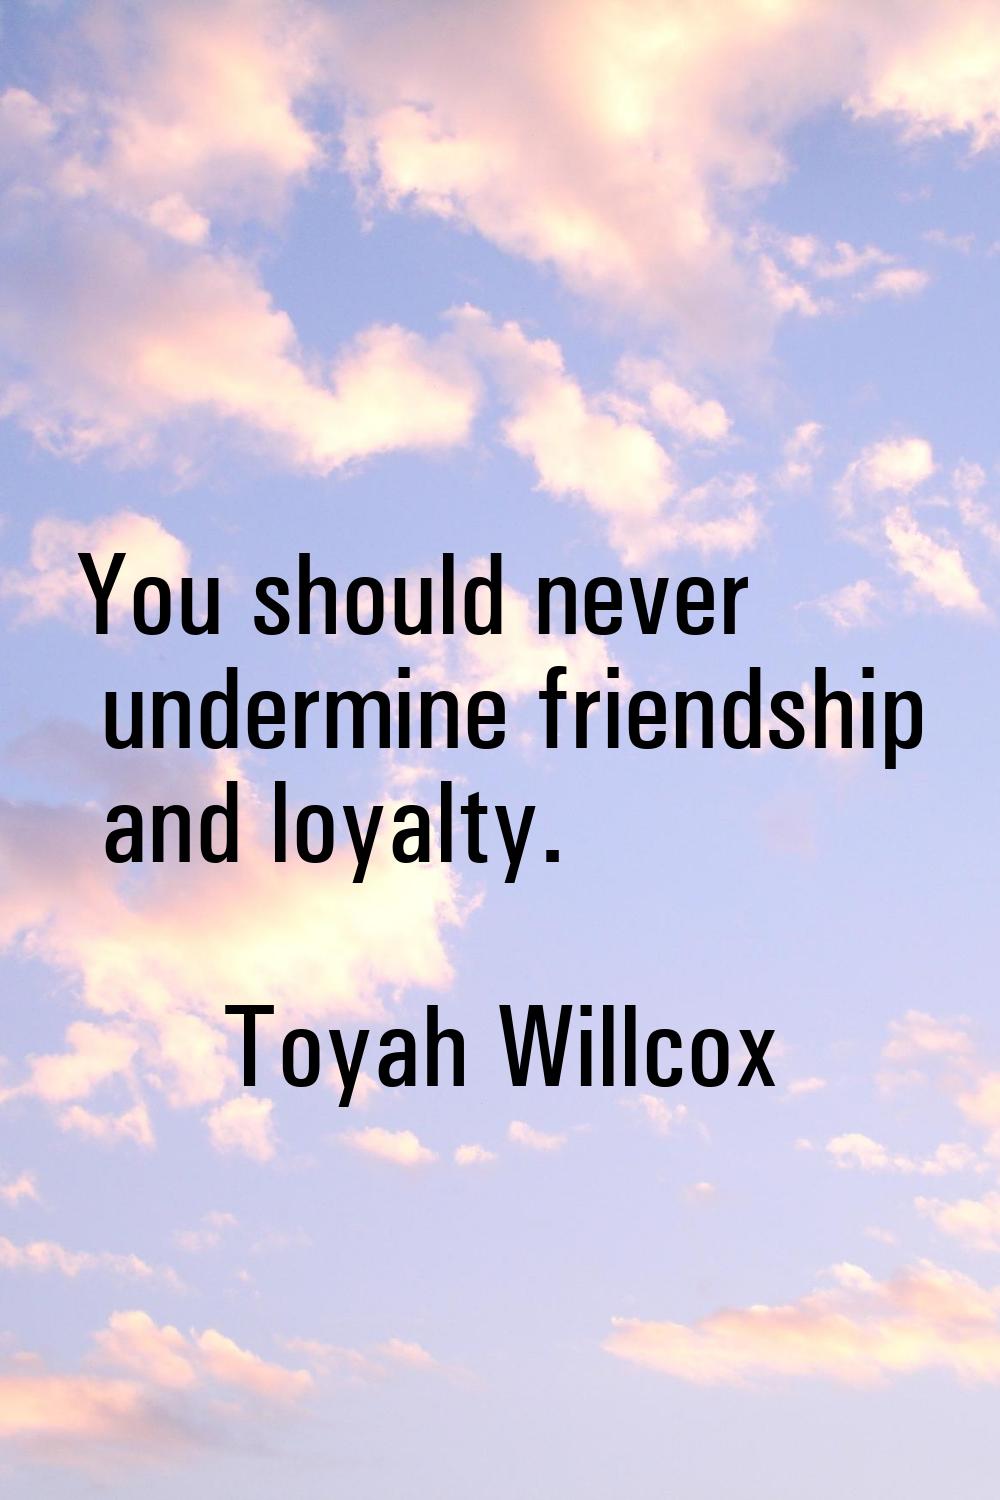 You should never undermine friendship and loyalty.